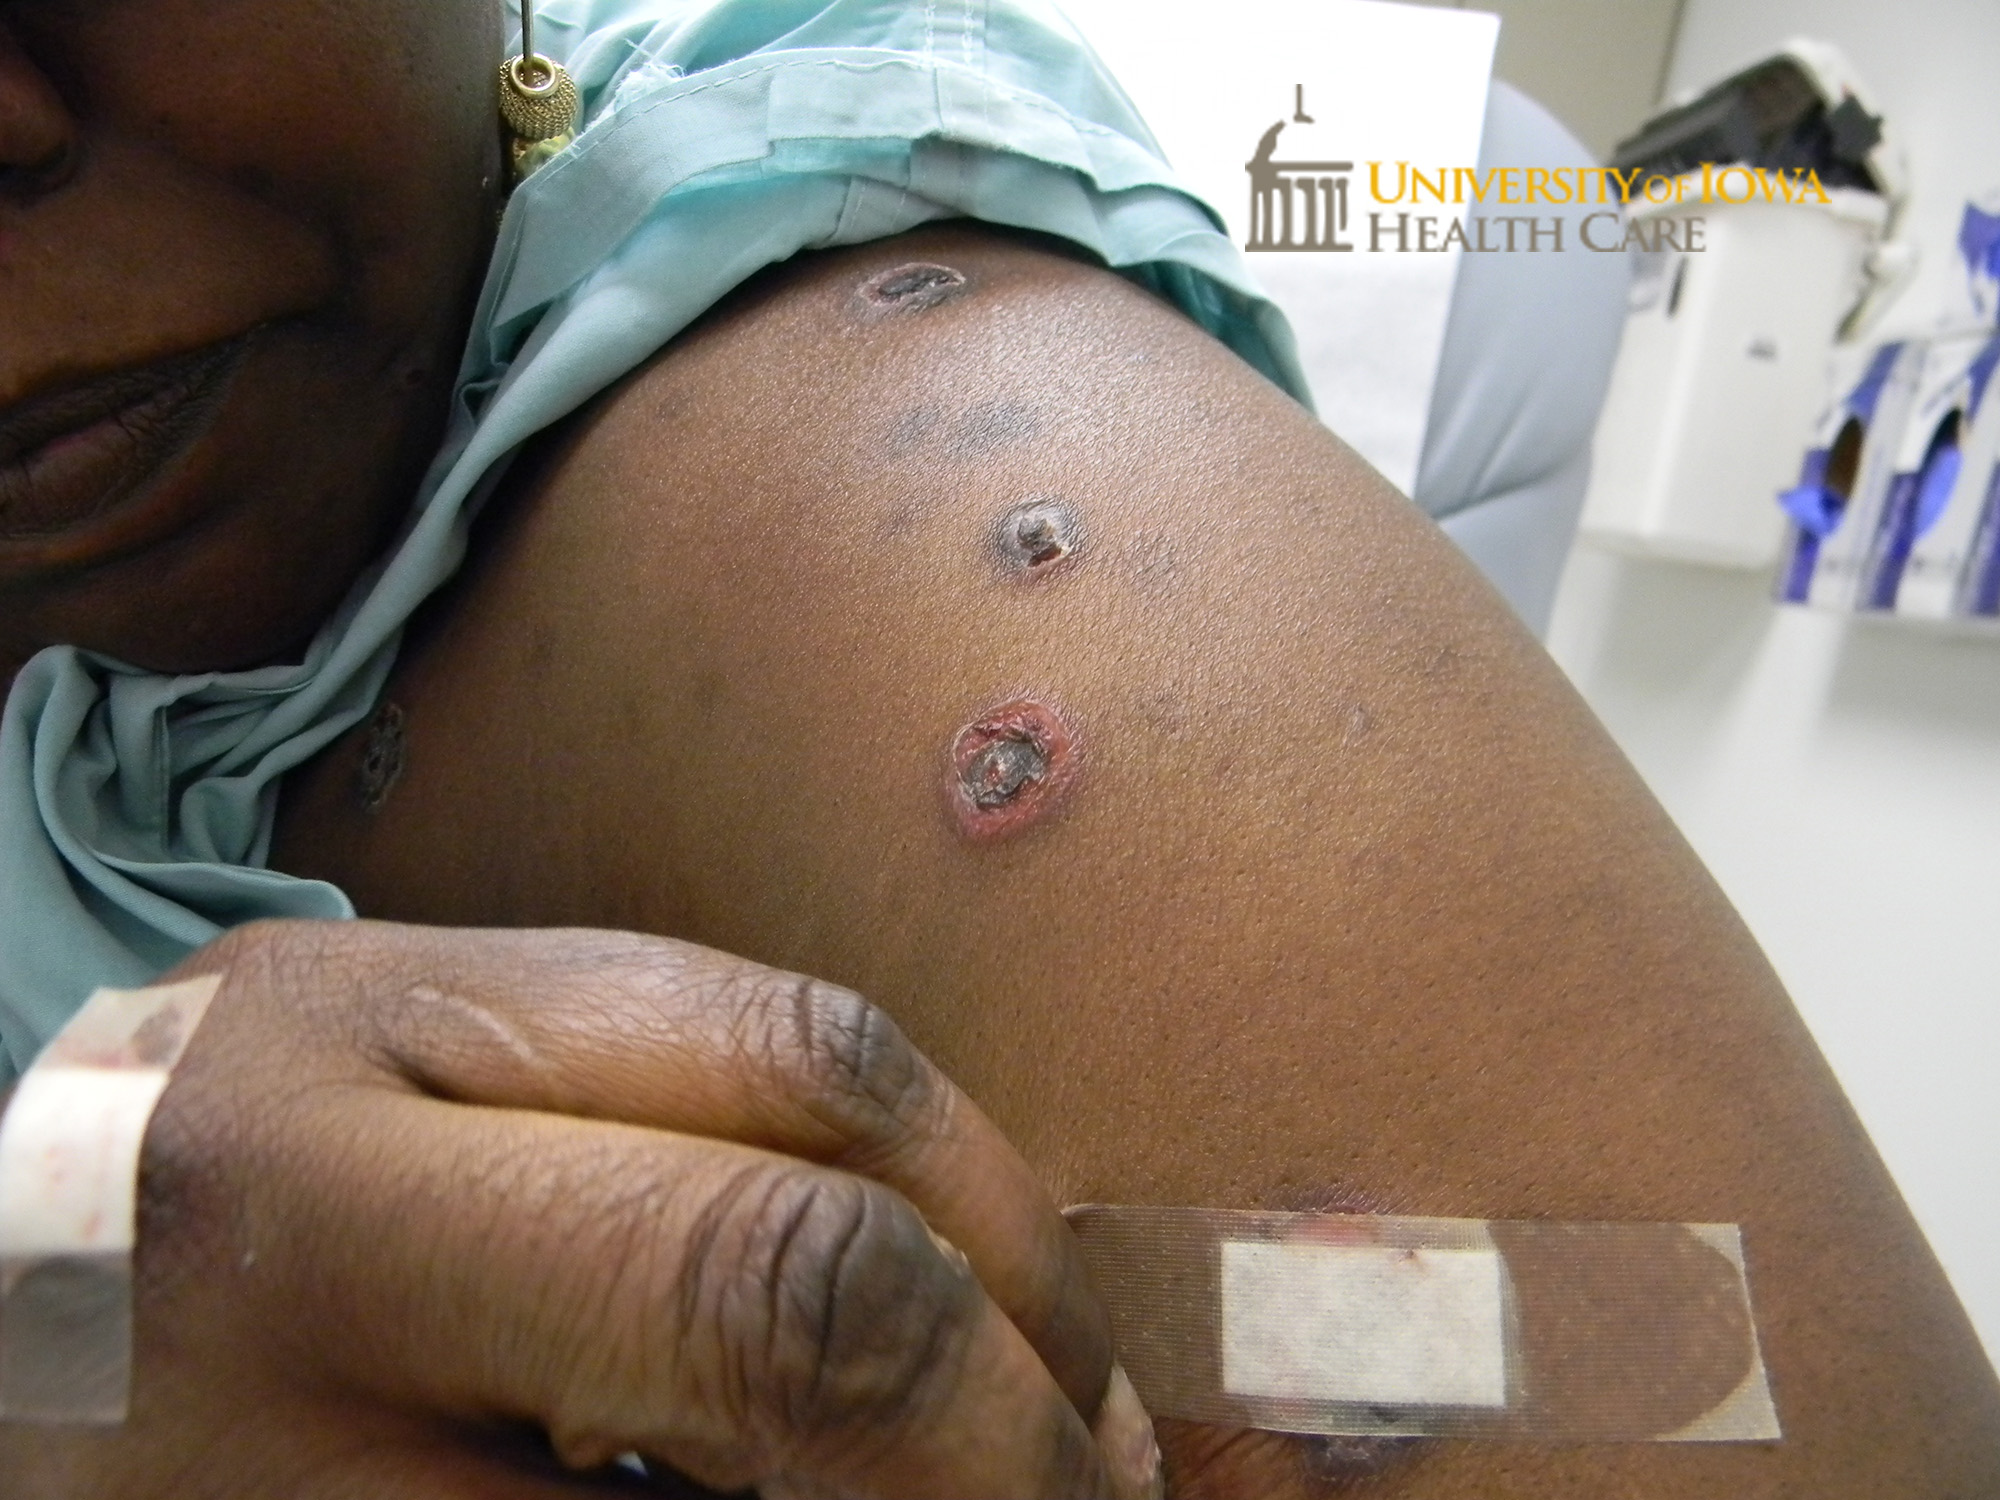 Circular erosions with hemorrhagic crust on the arms. (click images for higher resolution).